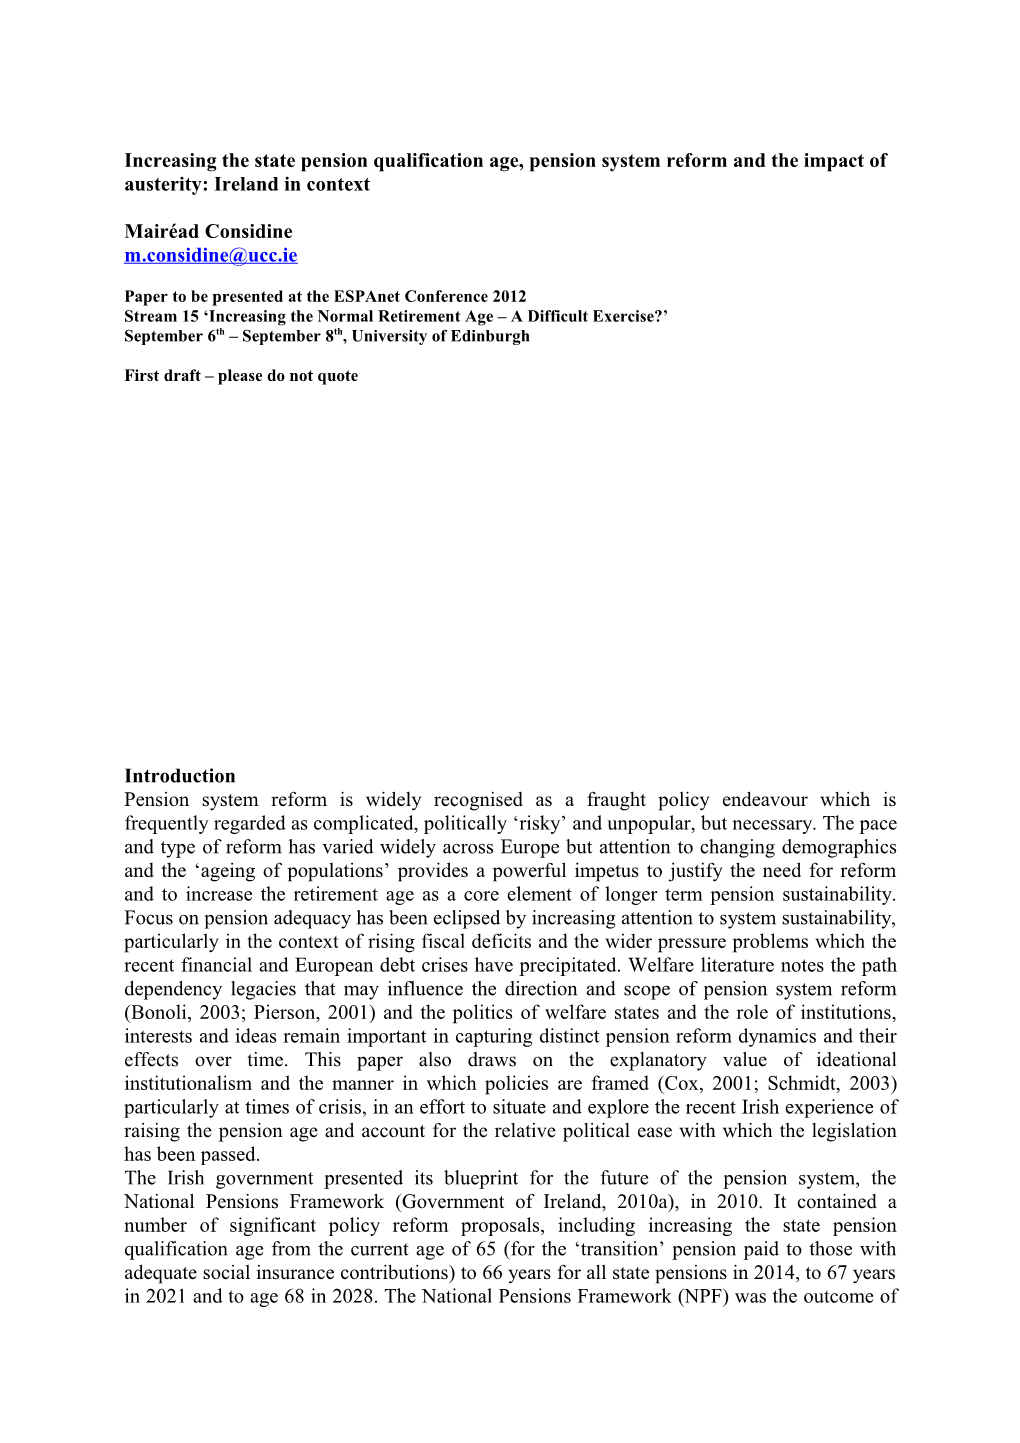 Paper to Be Presented at the Espanet Conference 2012